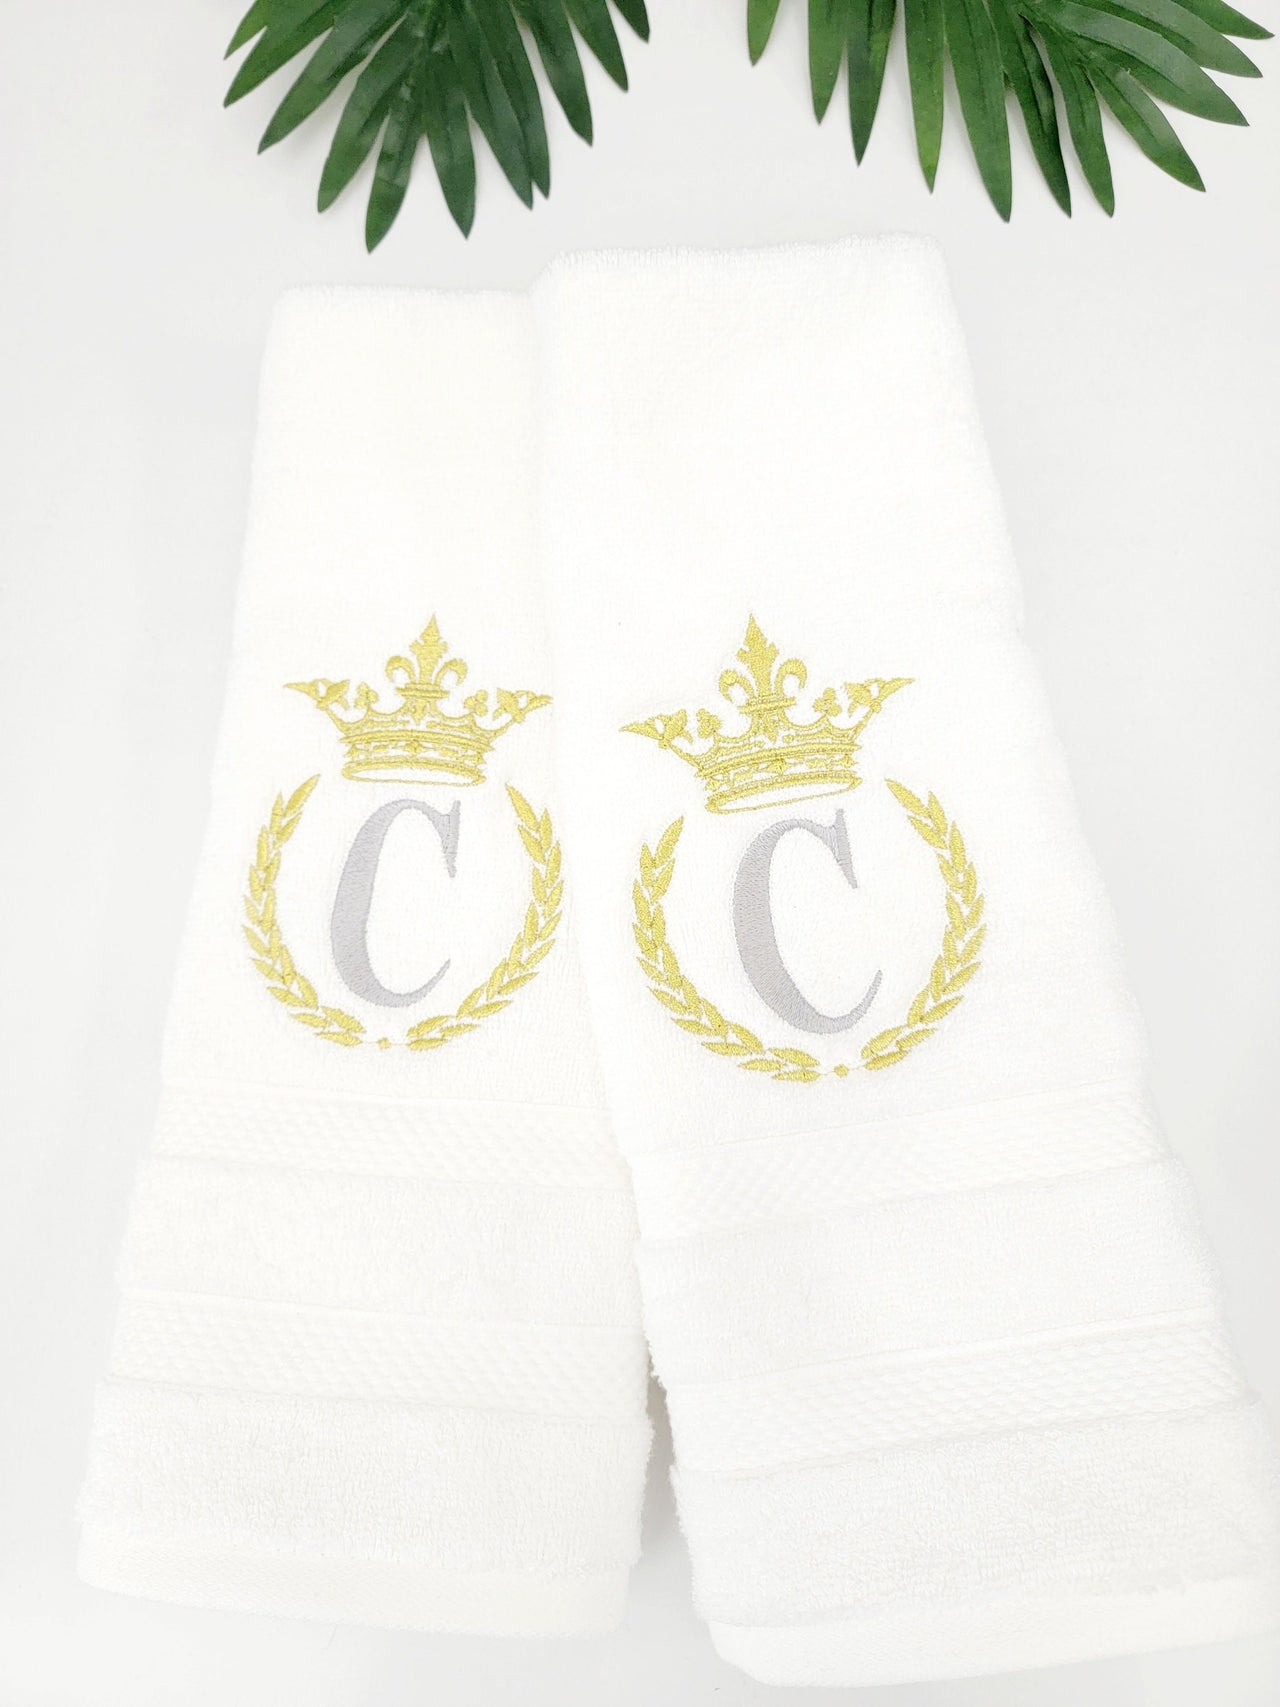 Monogrammed Hand Towel Set - Personalized Hand Towels With Queen Crown - Set of  Two Guest Hand Towels - Housewarming Gift